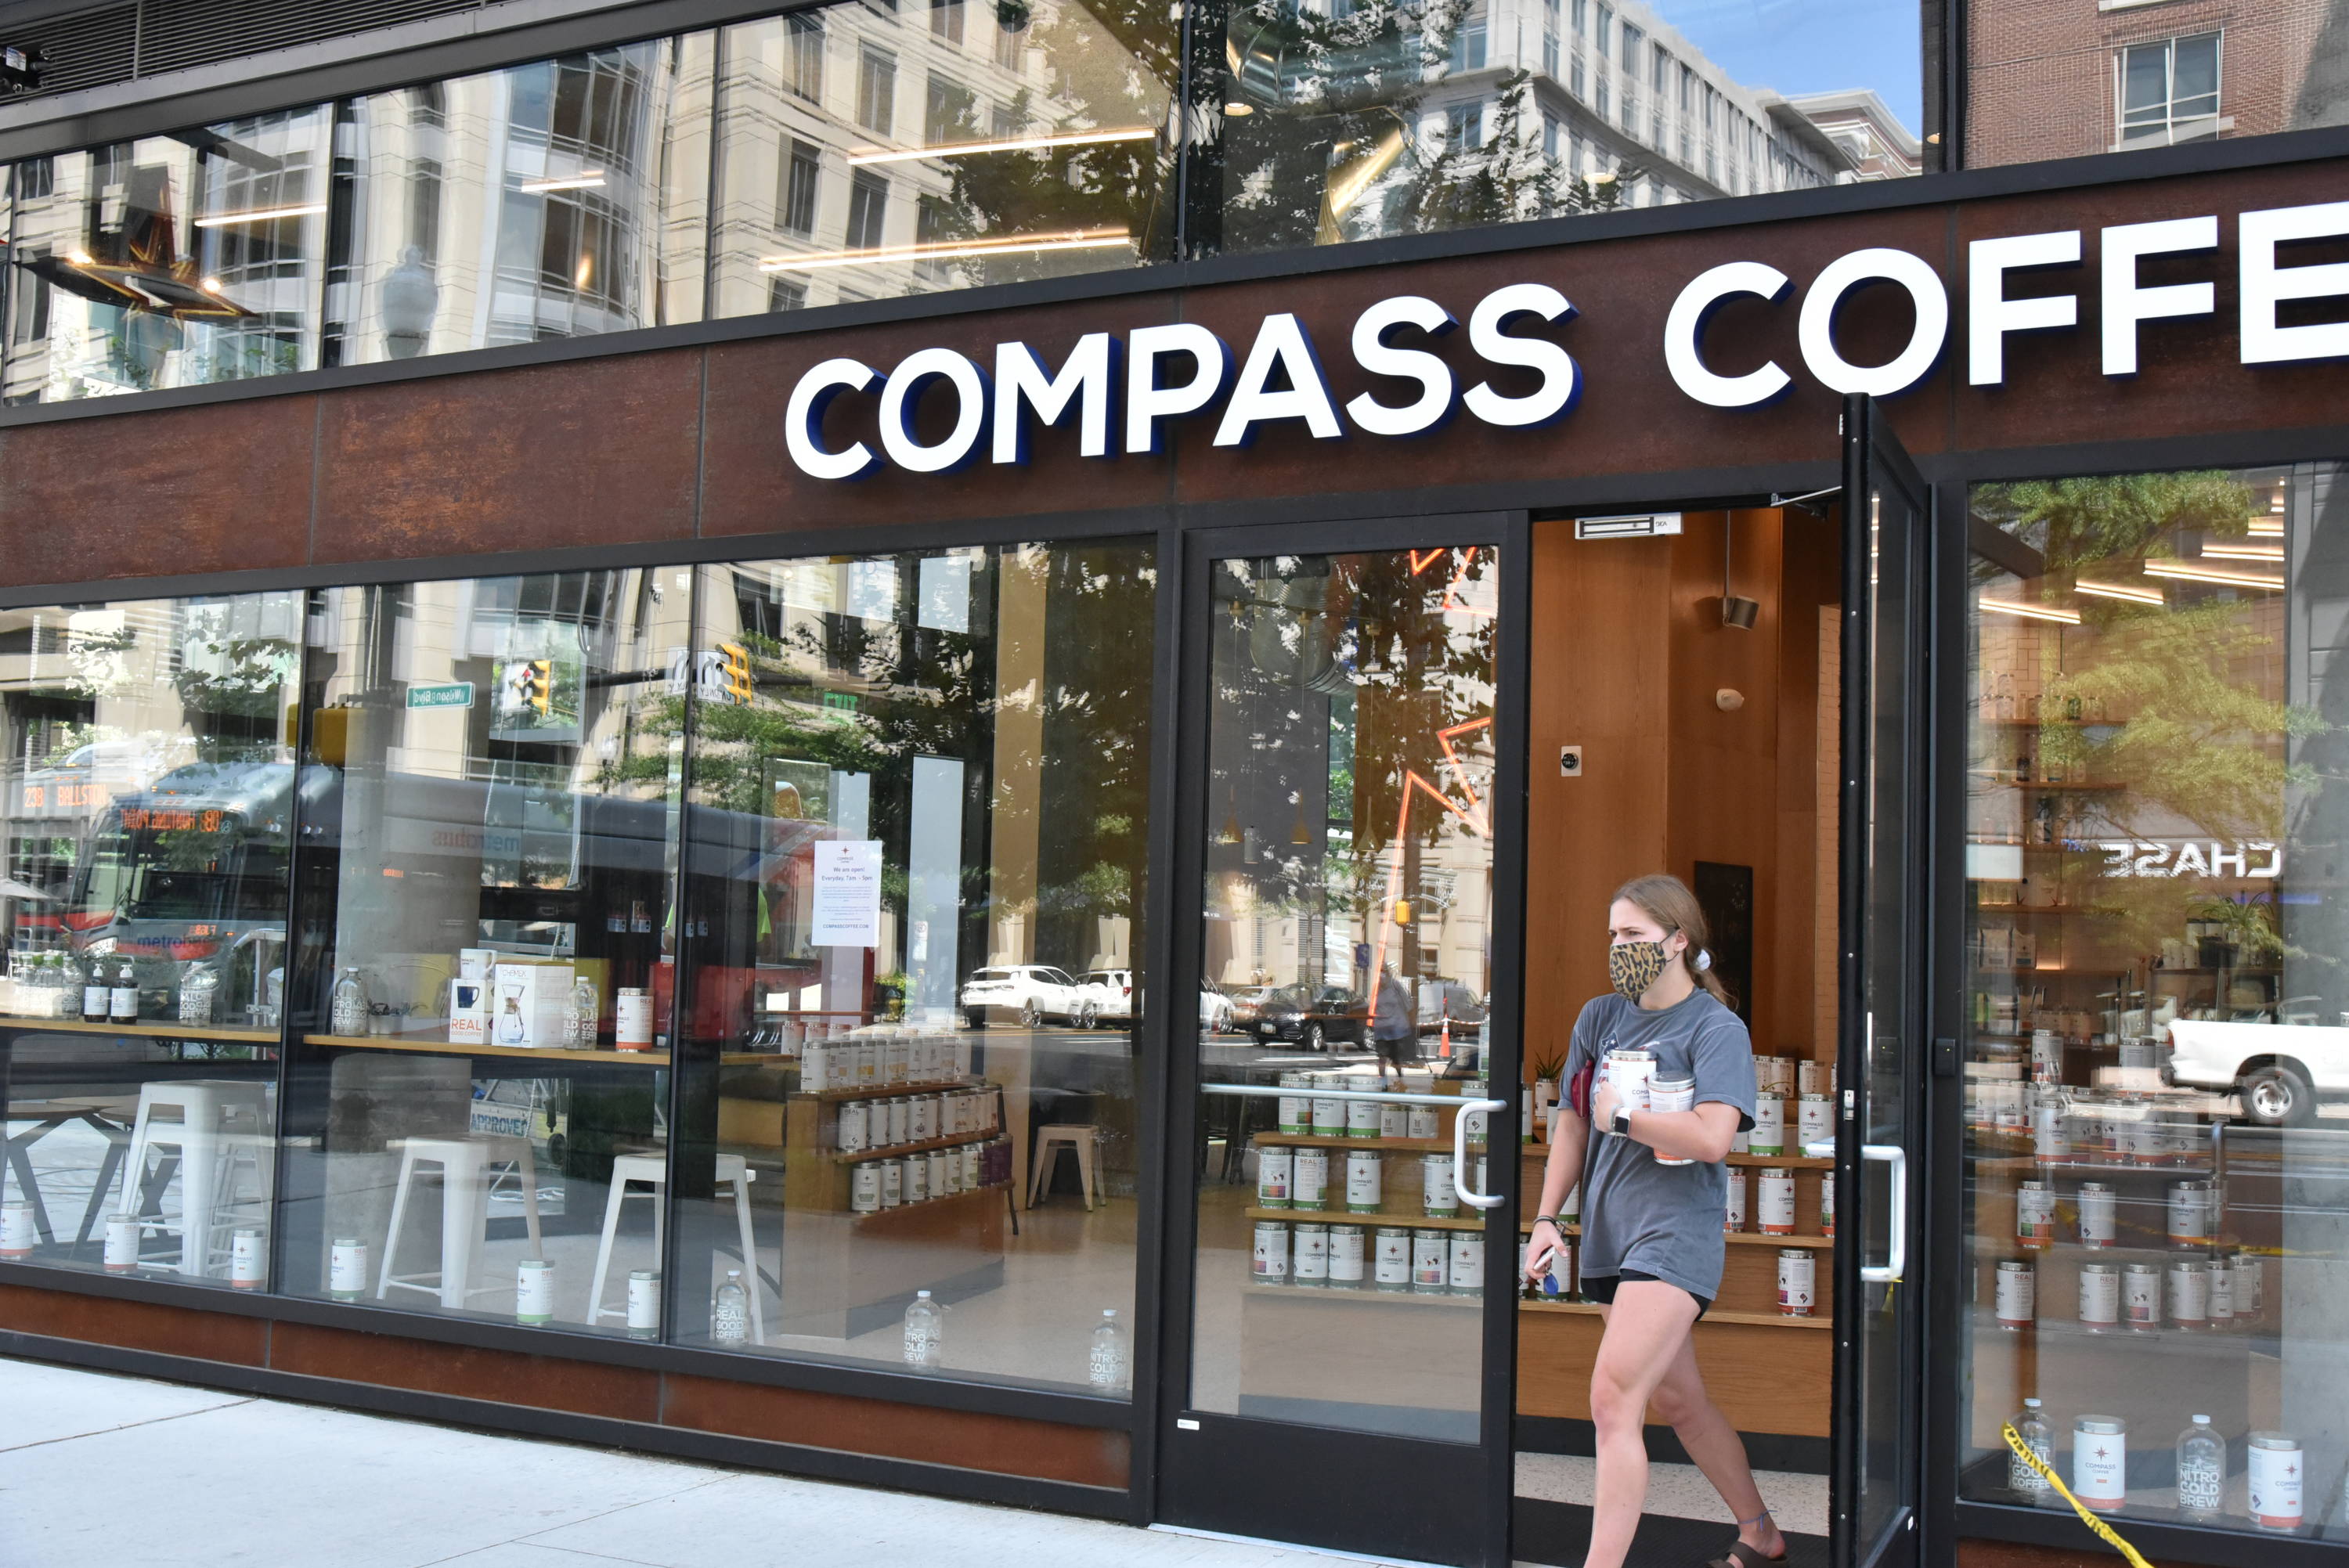 Ivy City Compass roastery looking close now!!” - PoPville